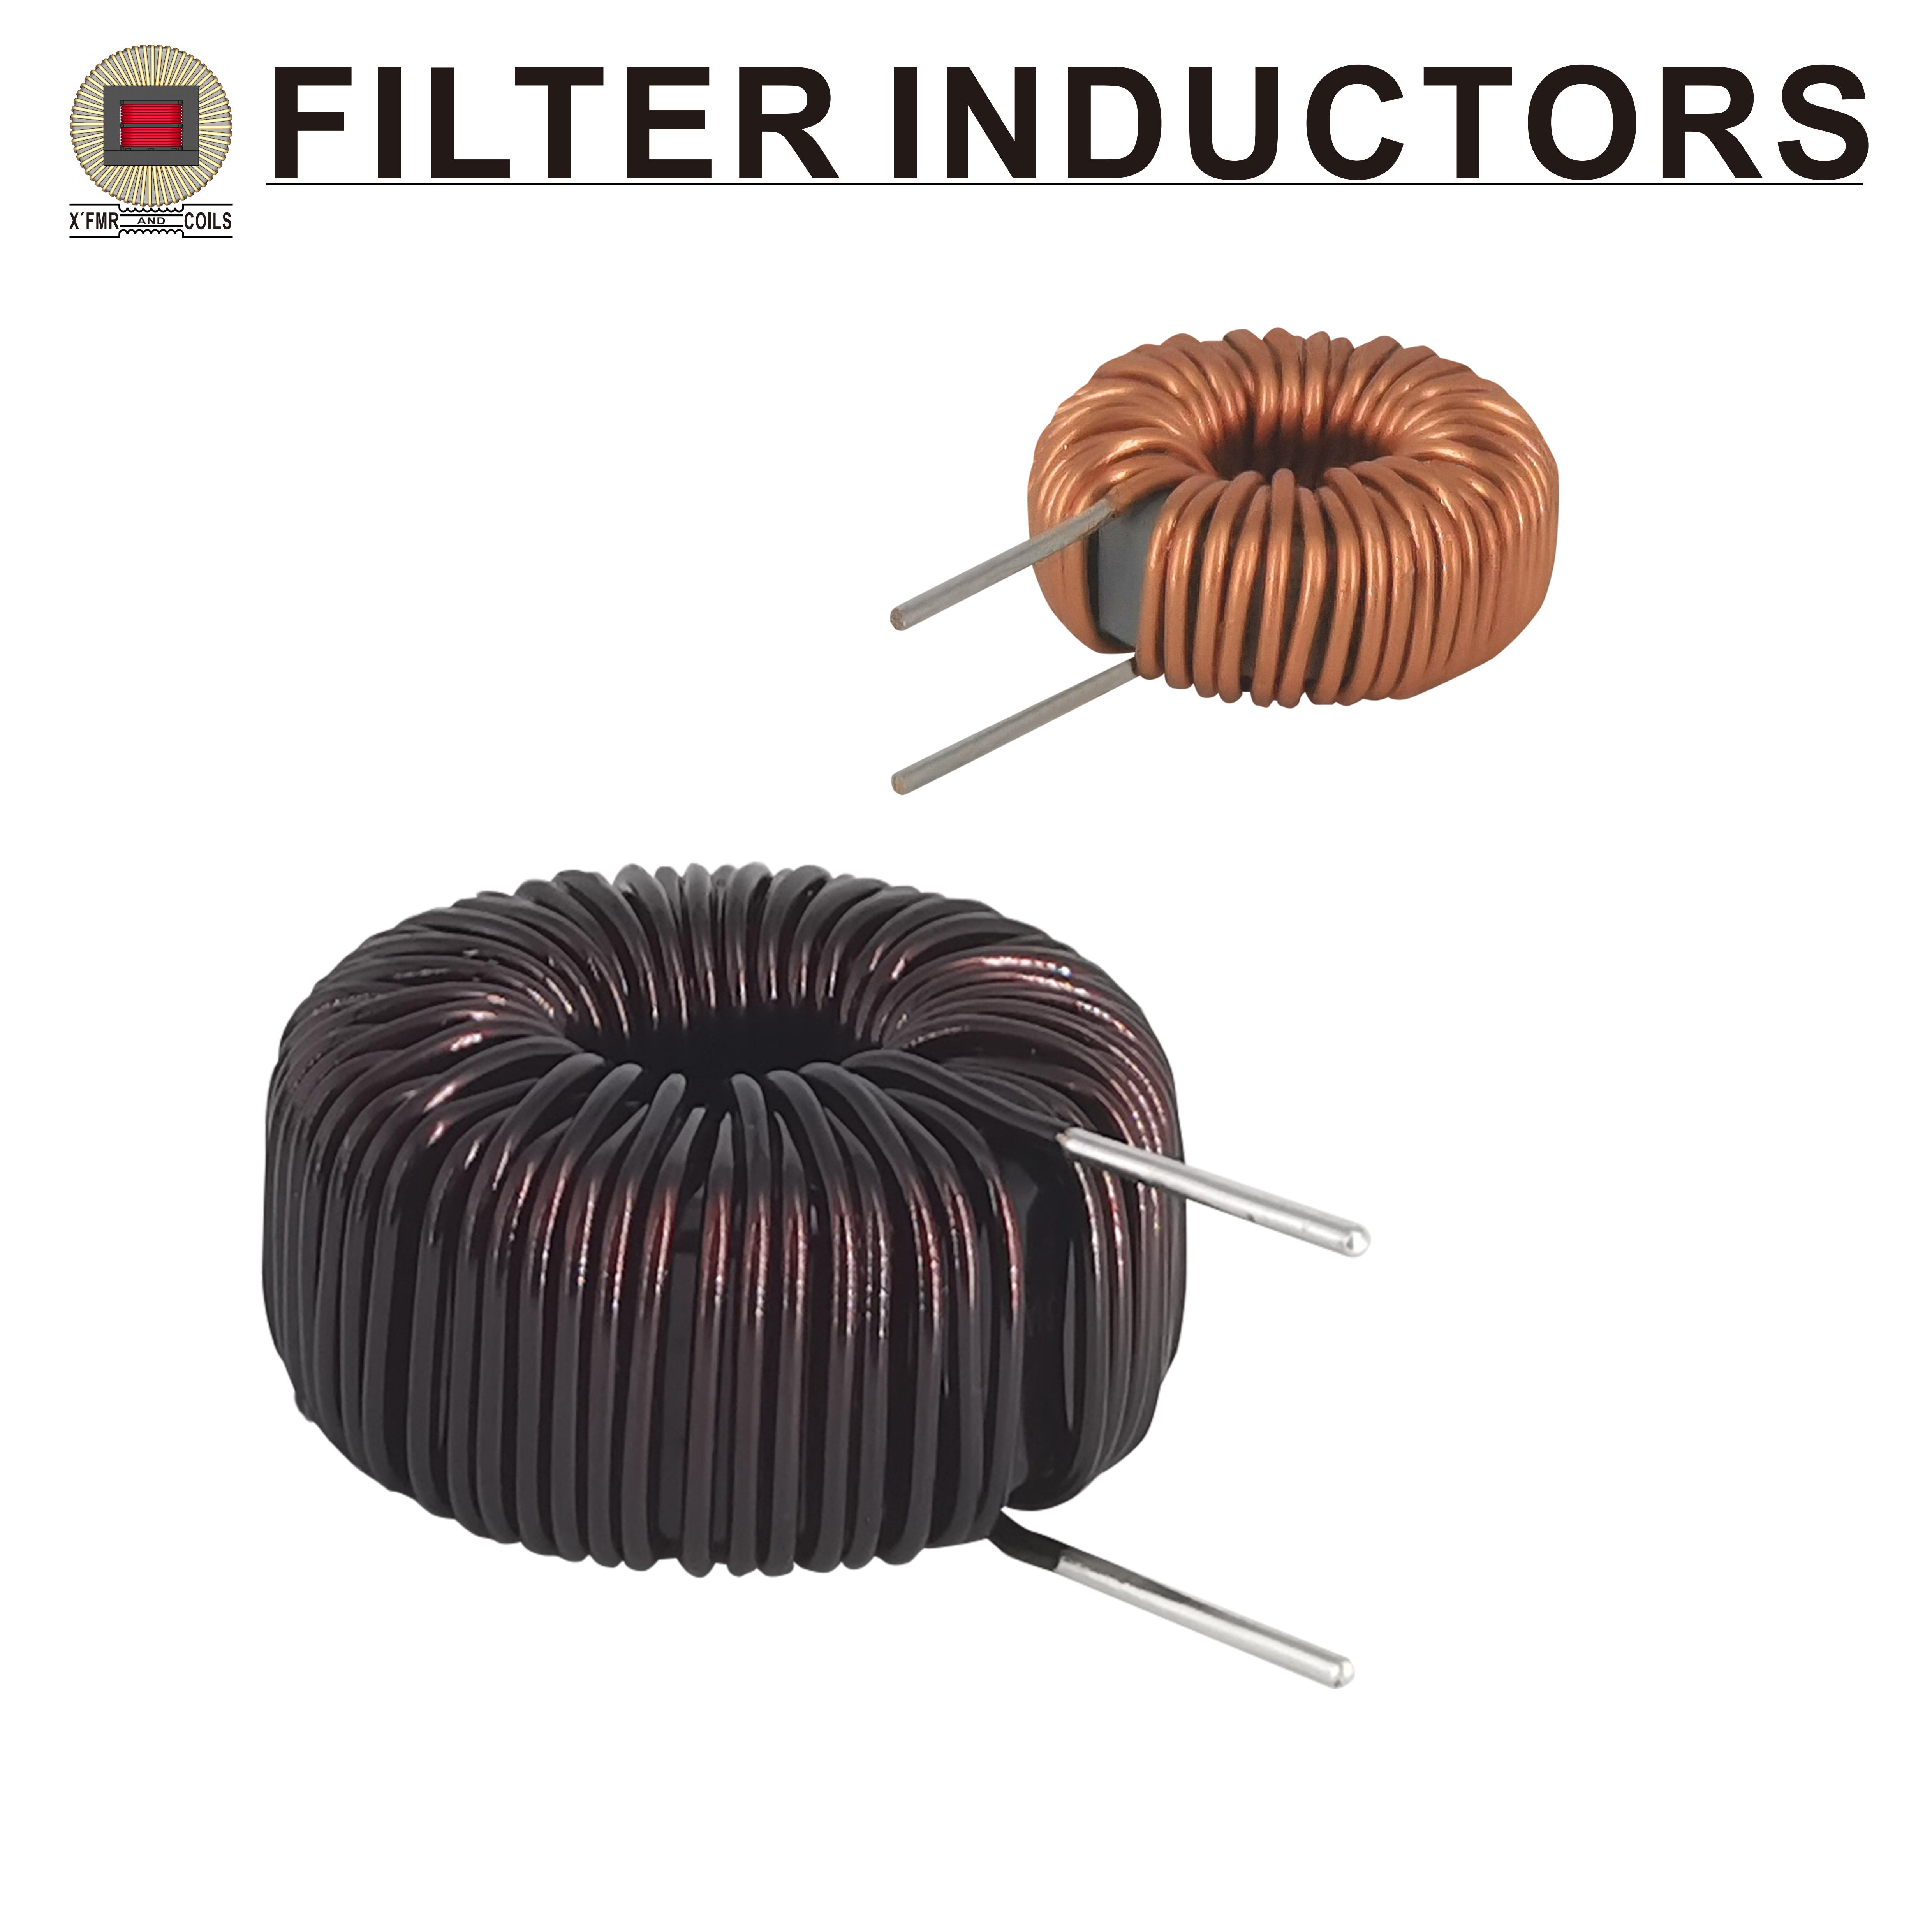 Filter Inductors FI-01 Series